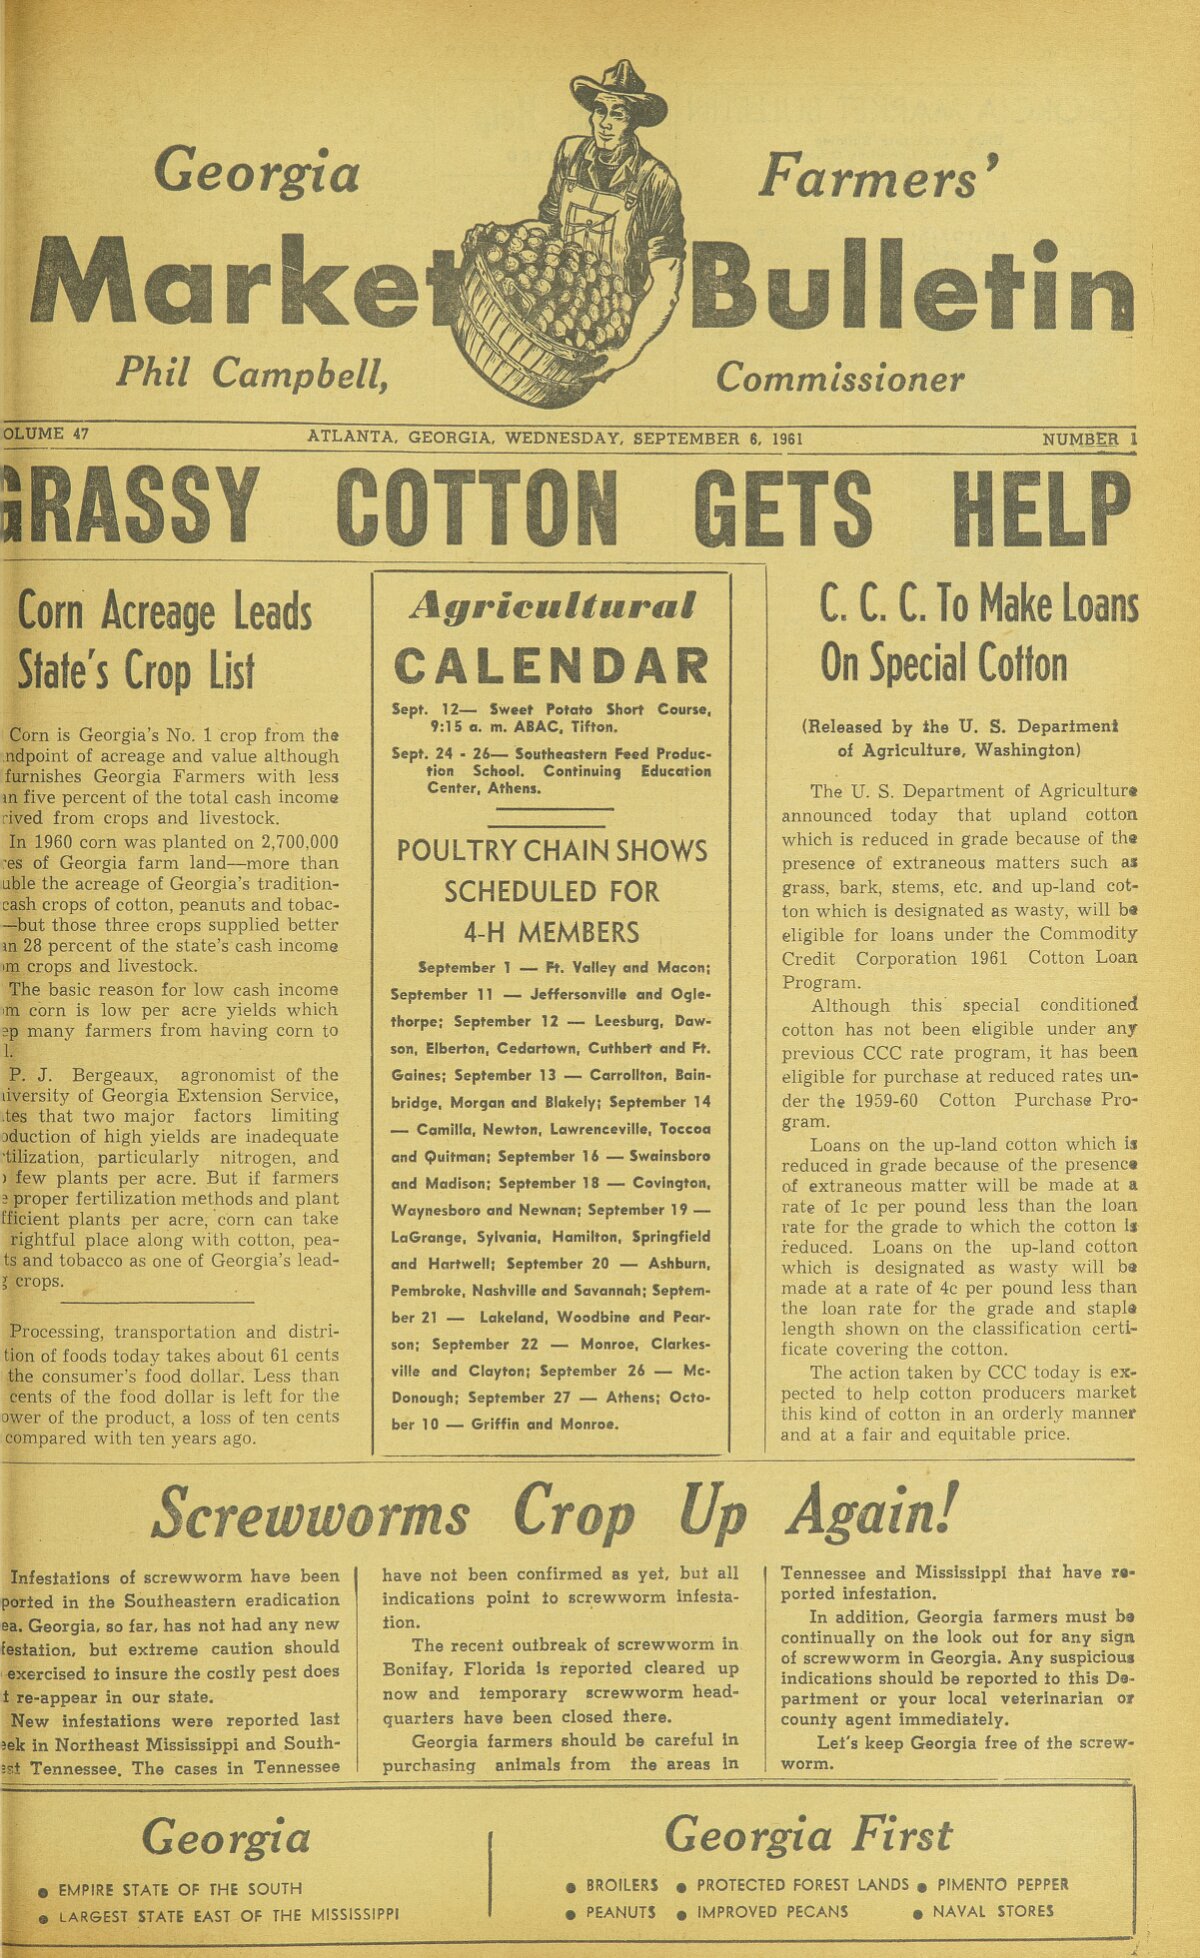 Farmers and consumers market bulletin, 1961 September 6